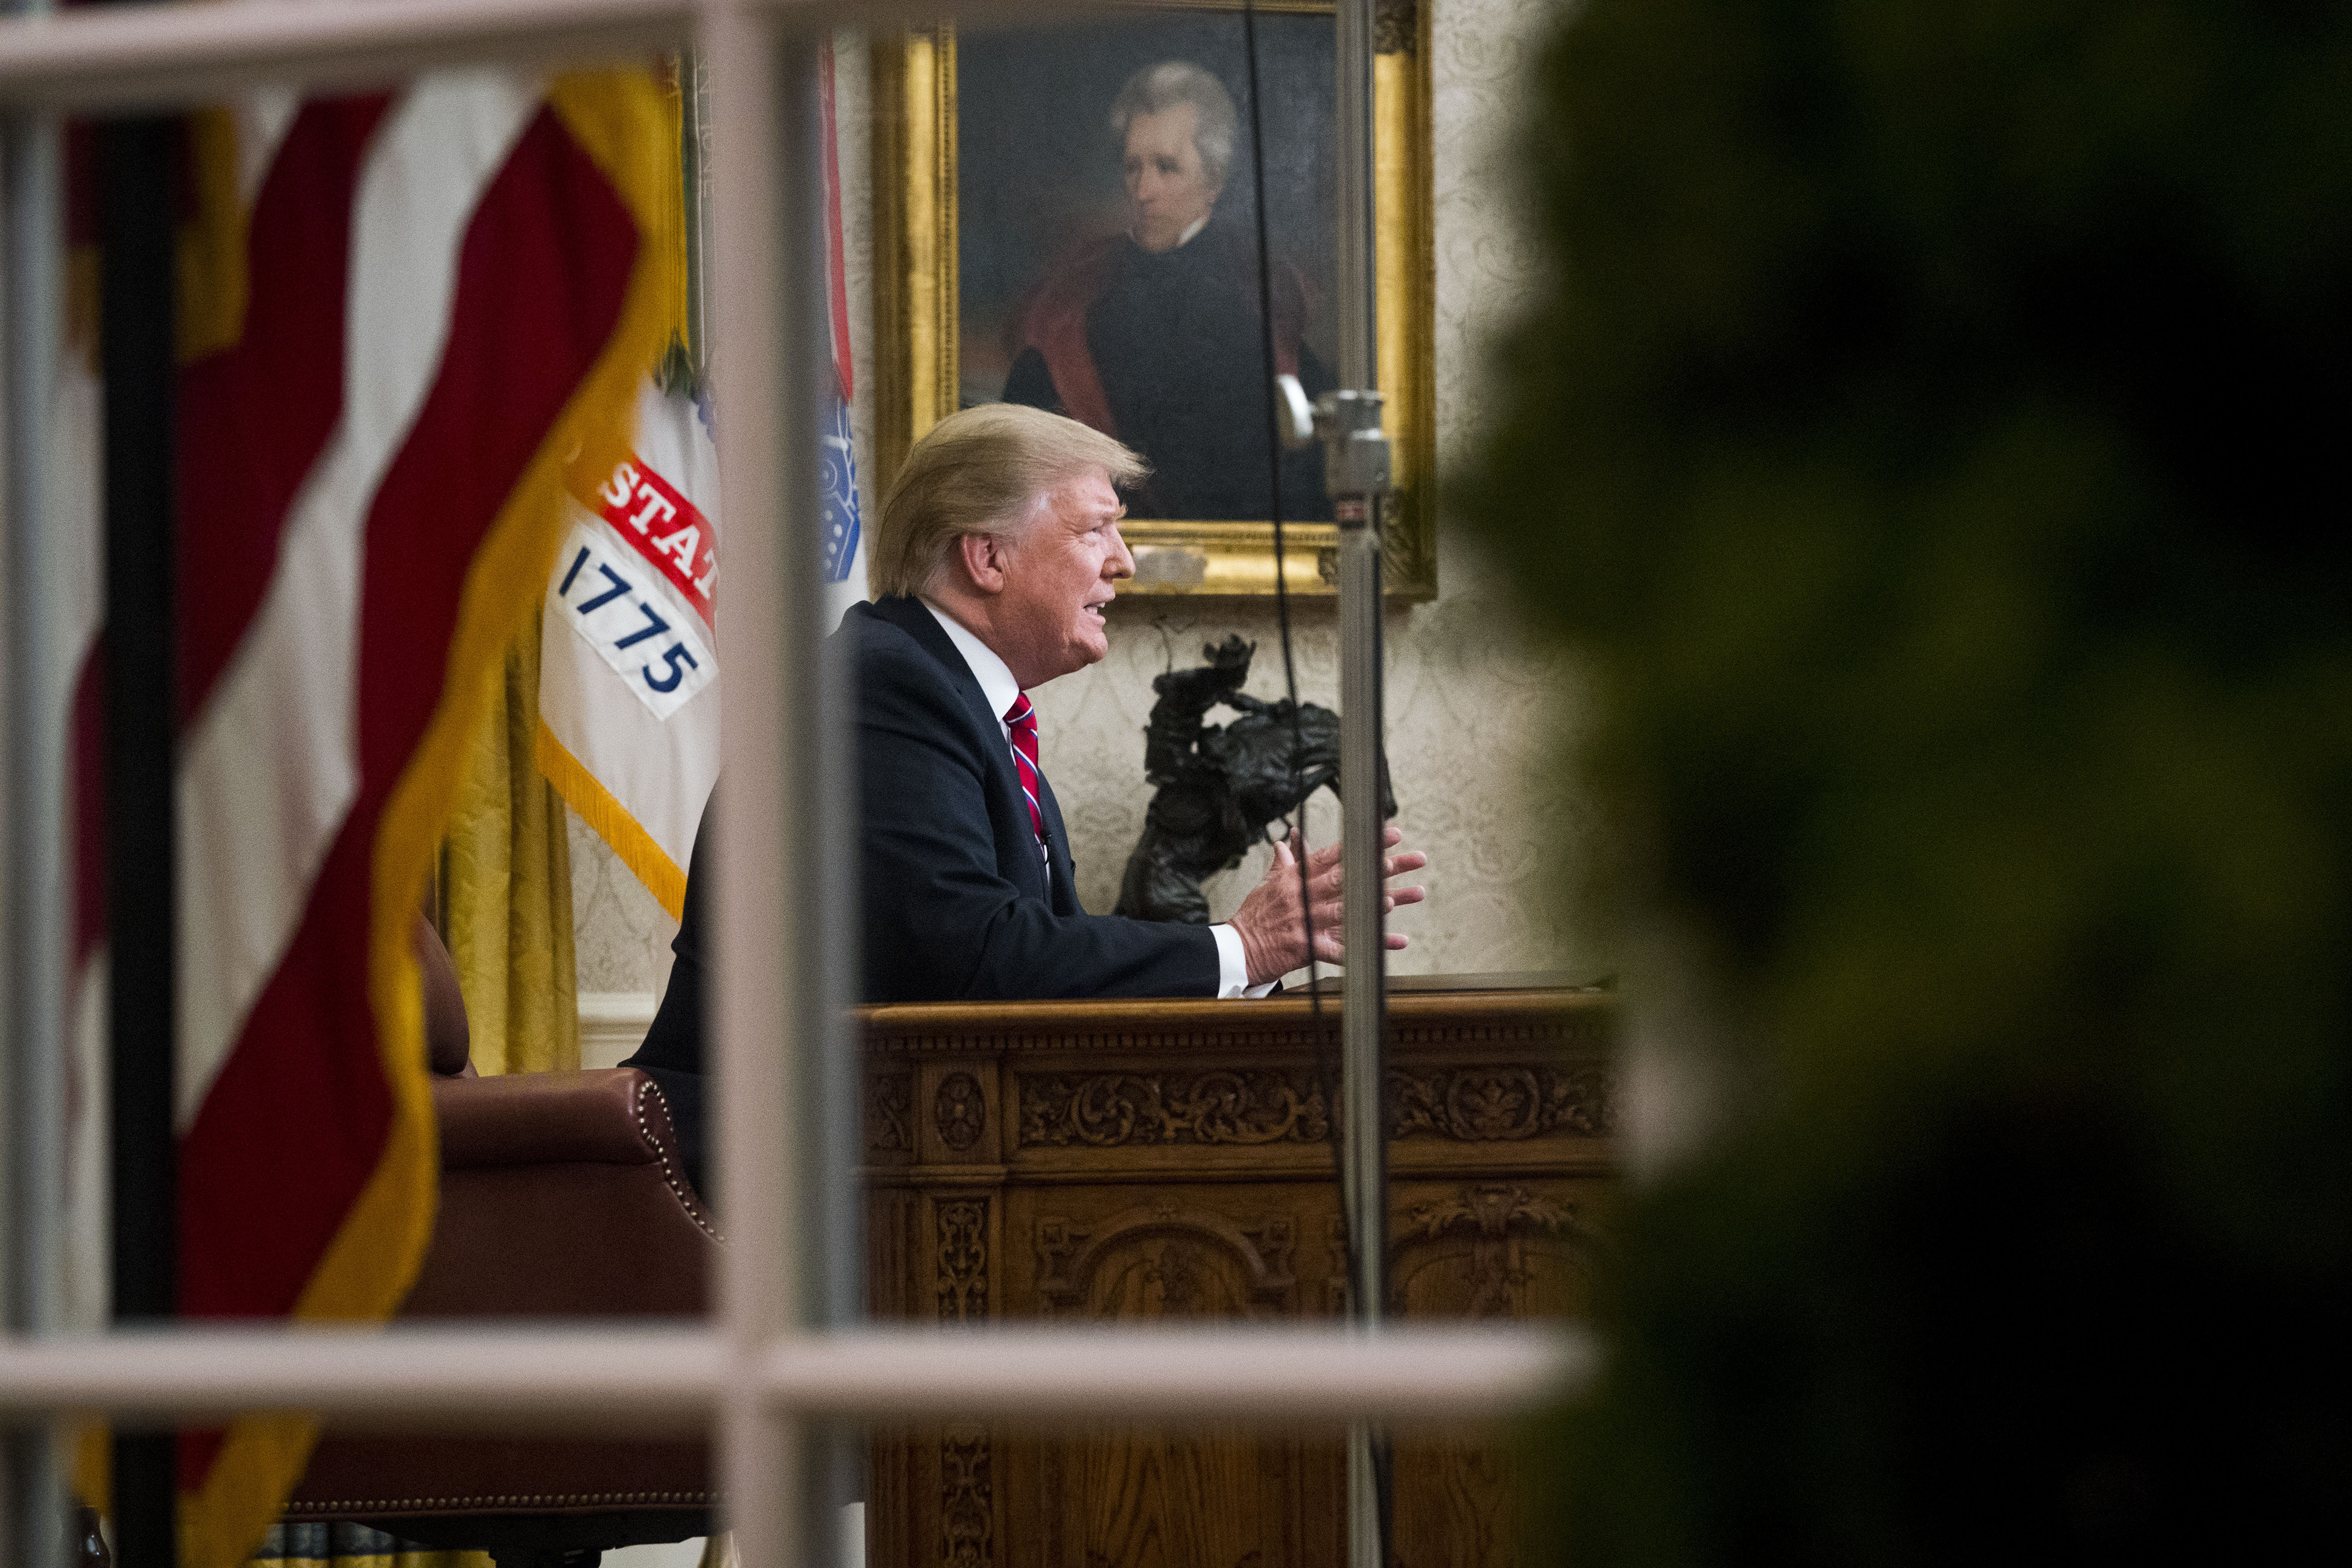 Donald Trump addresses the nation about border security, on the 18th day of the government shutdown, from the Oval Office of the White House in Washington on Tuesday.
